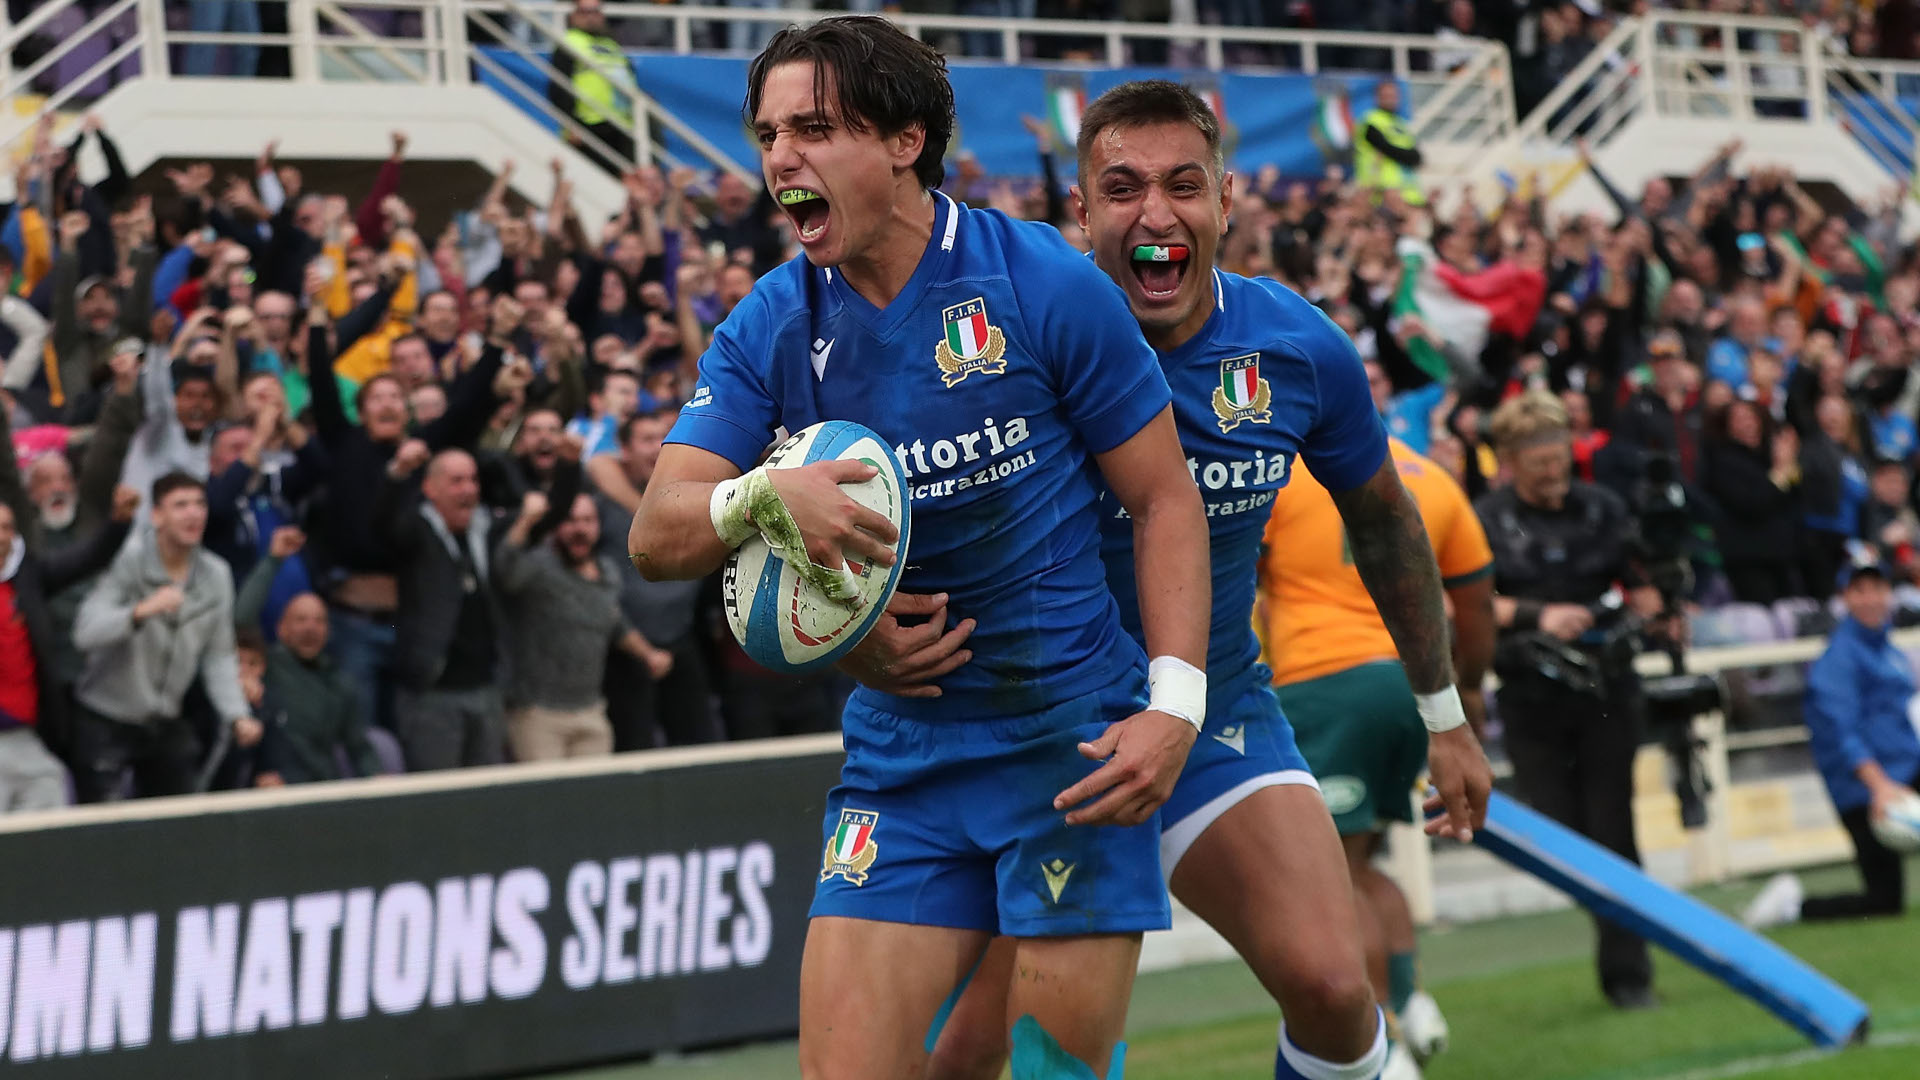 Italy vs South Africa live stream how to watch Autumn Nations Series rugby from anywhere today TechRadar